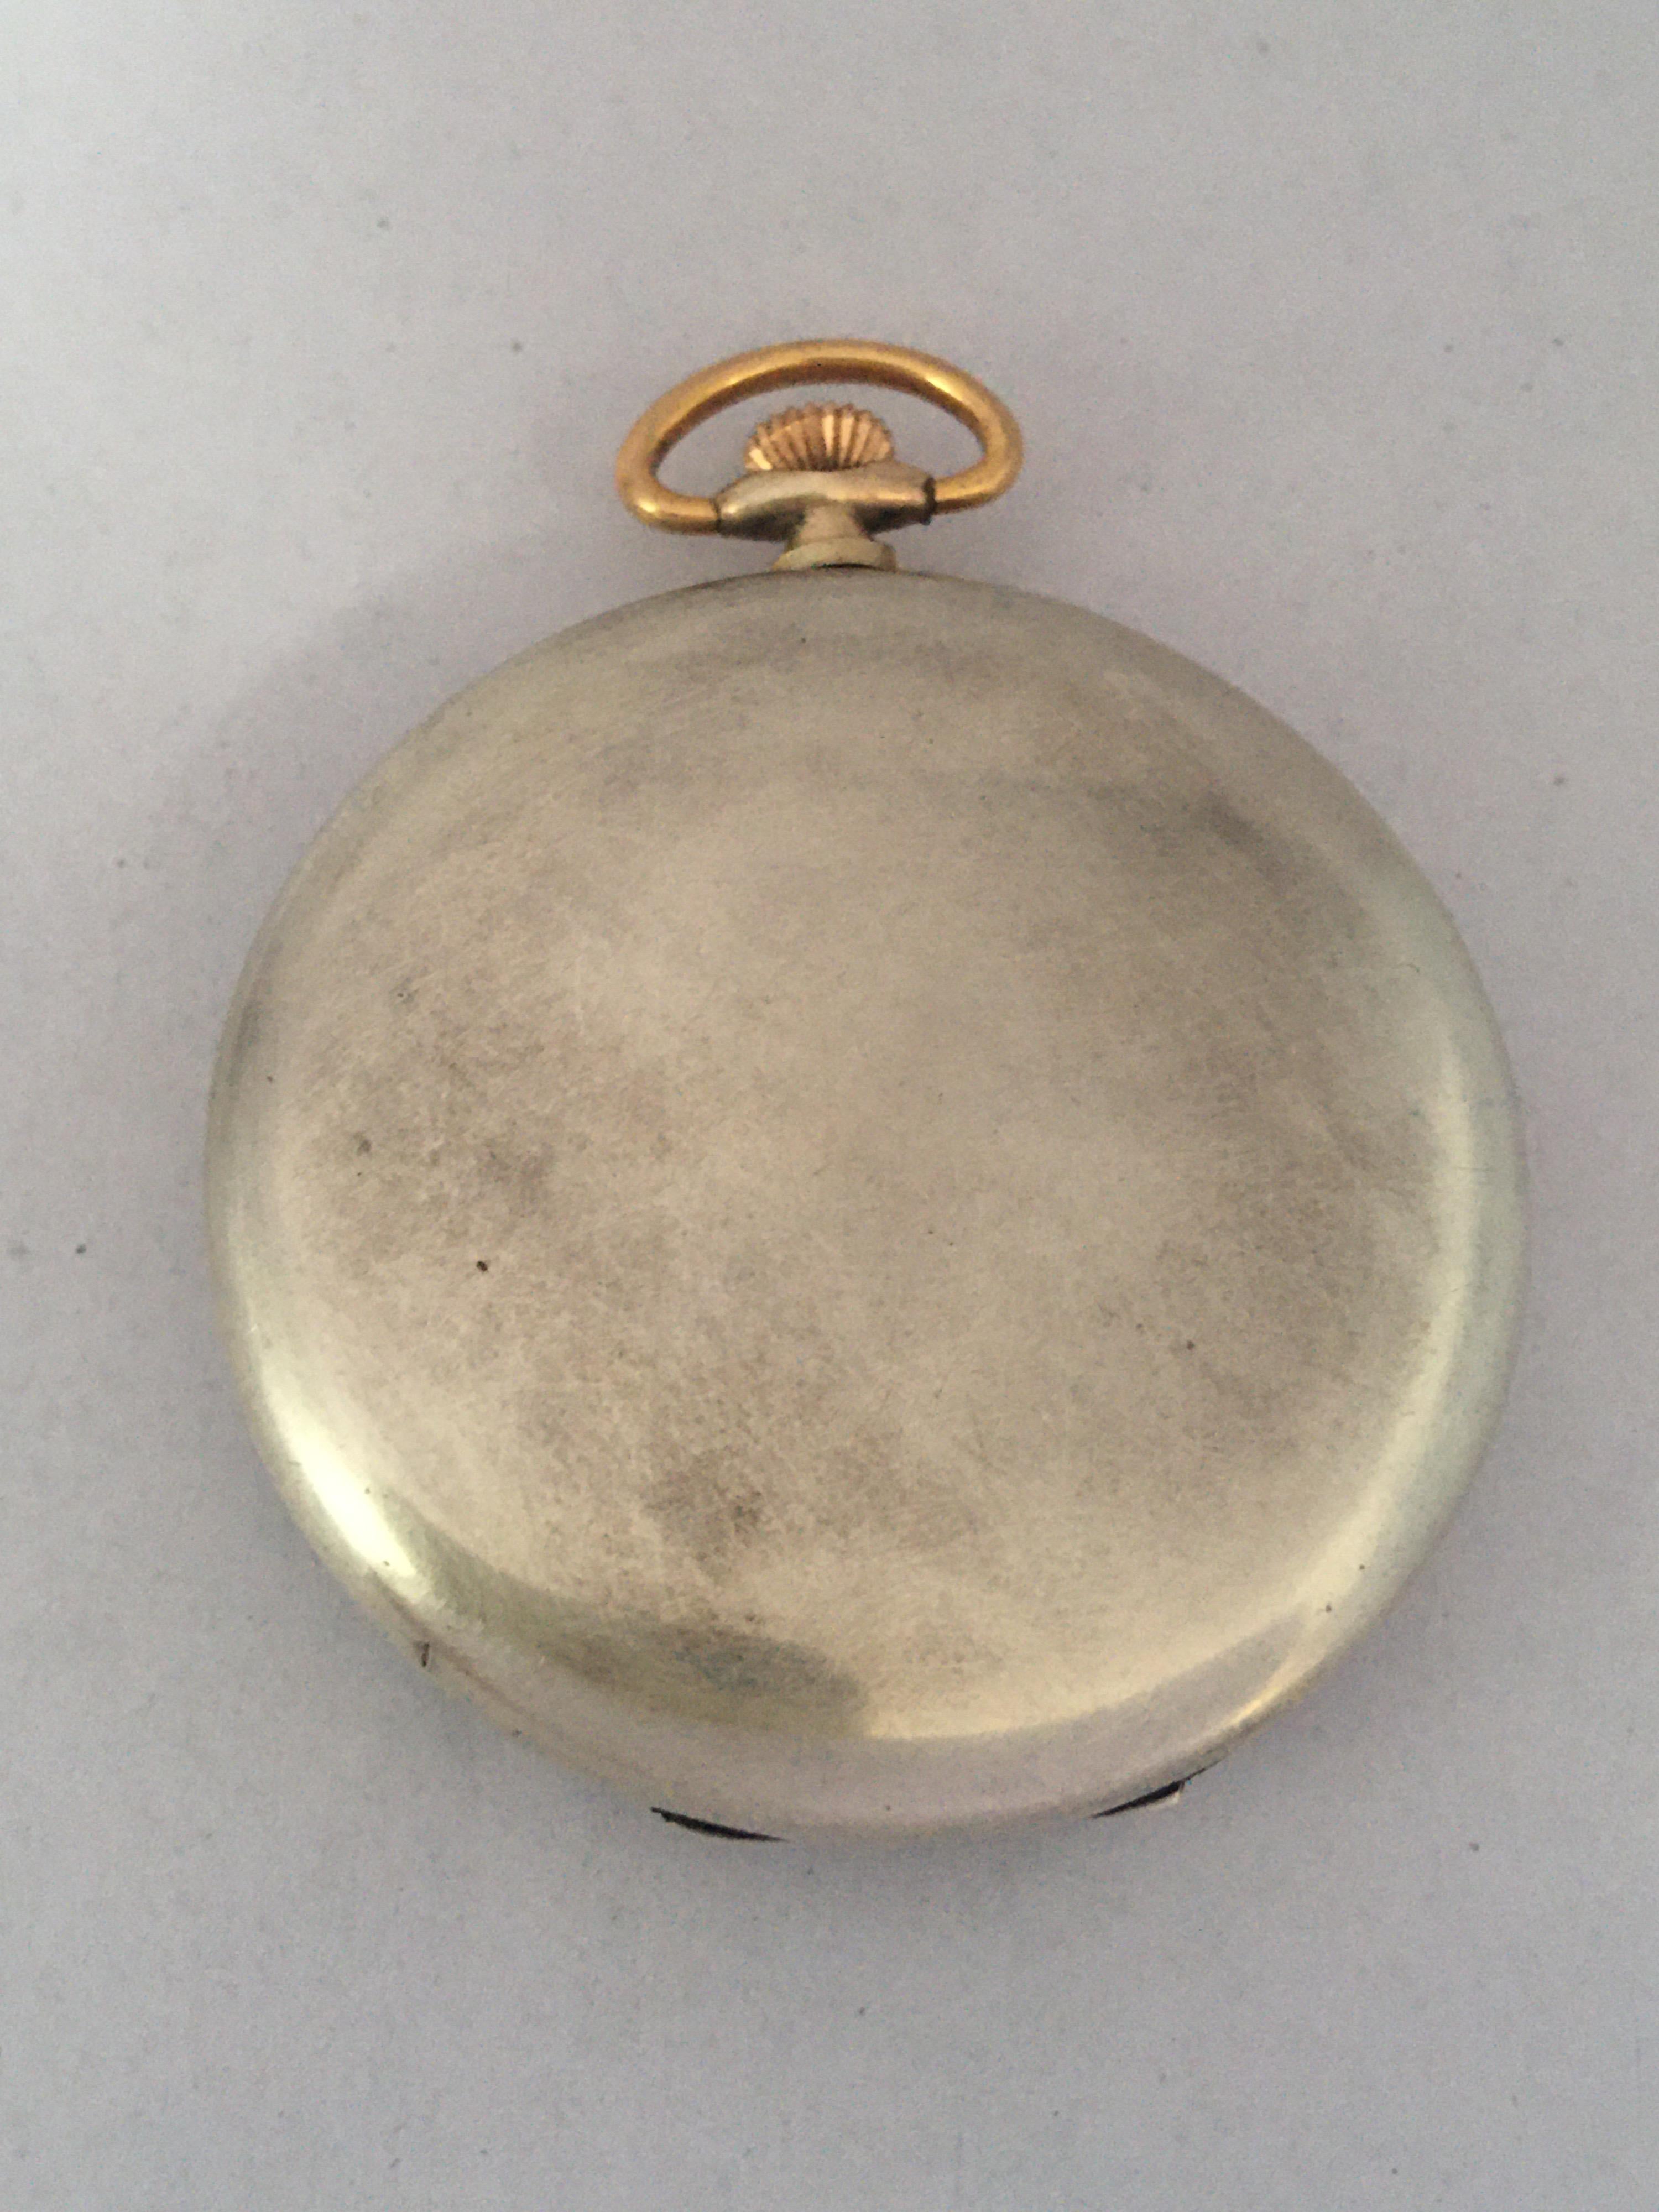 This watch is in good working condition and it is running. Visible signs of ageing and wear with tiny and light surface marks on the glass and on the watch case as shown. Visible marks on the dial as shown. Please study the images carefully as form